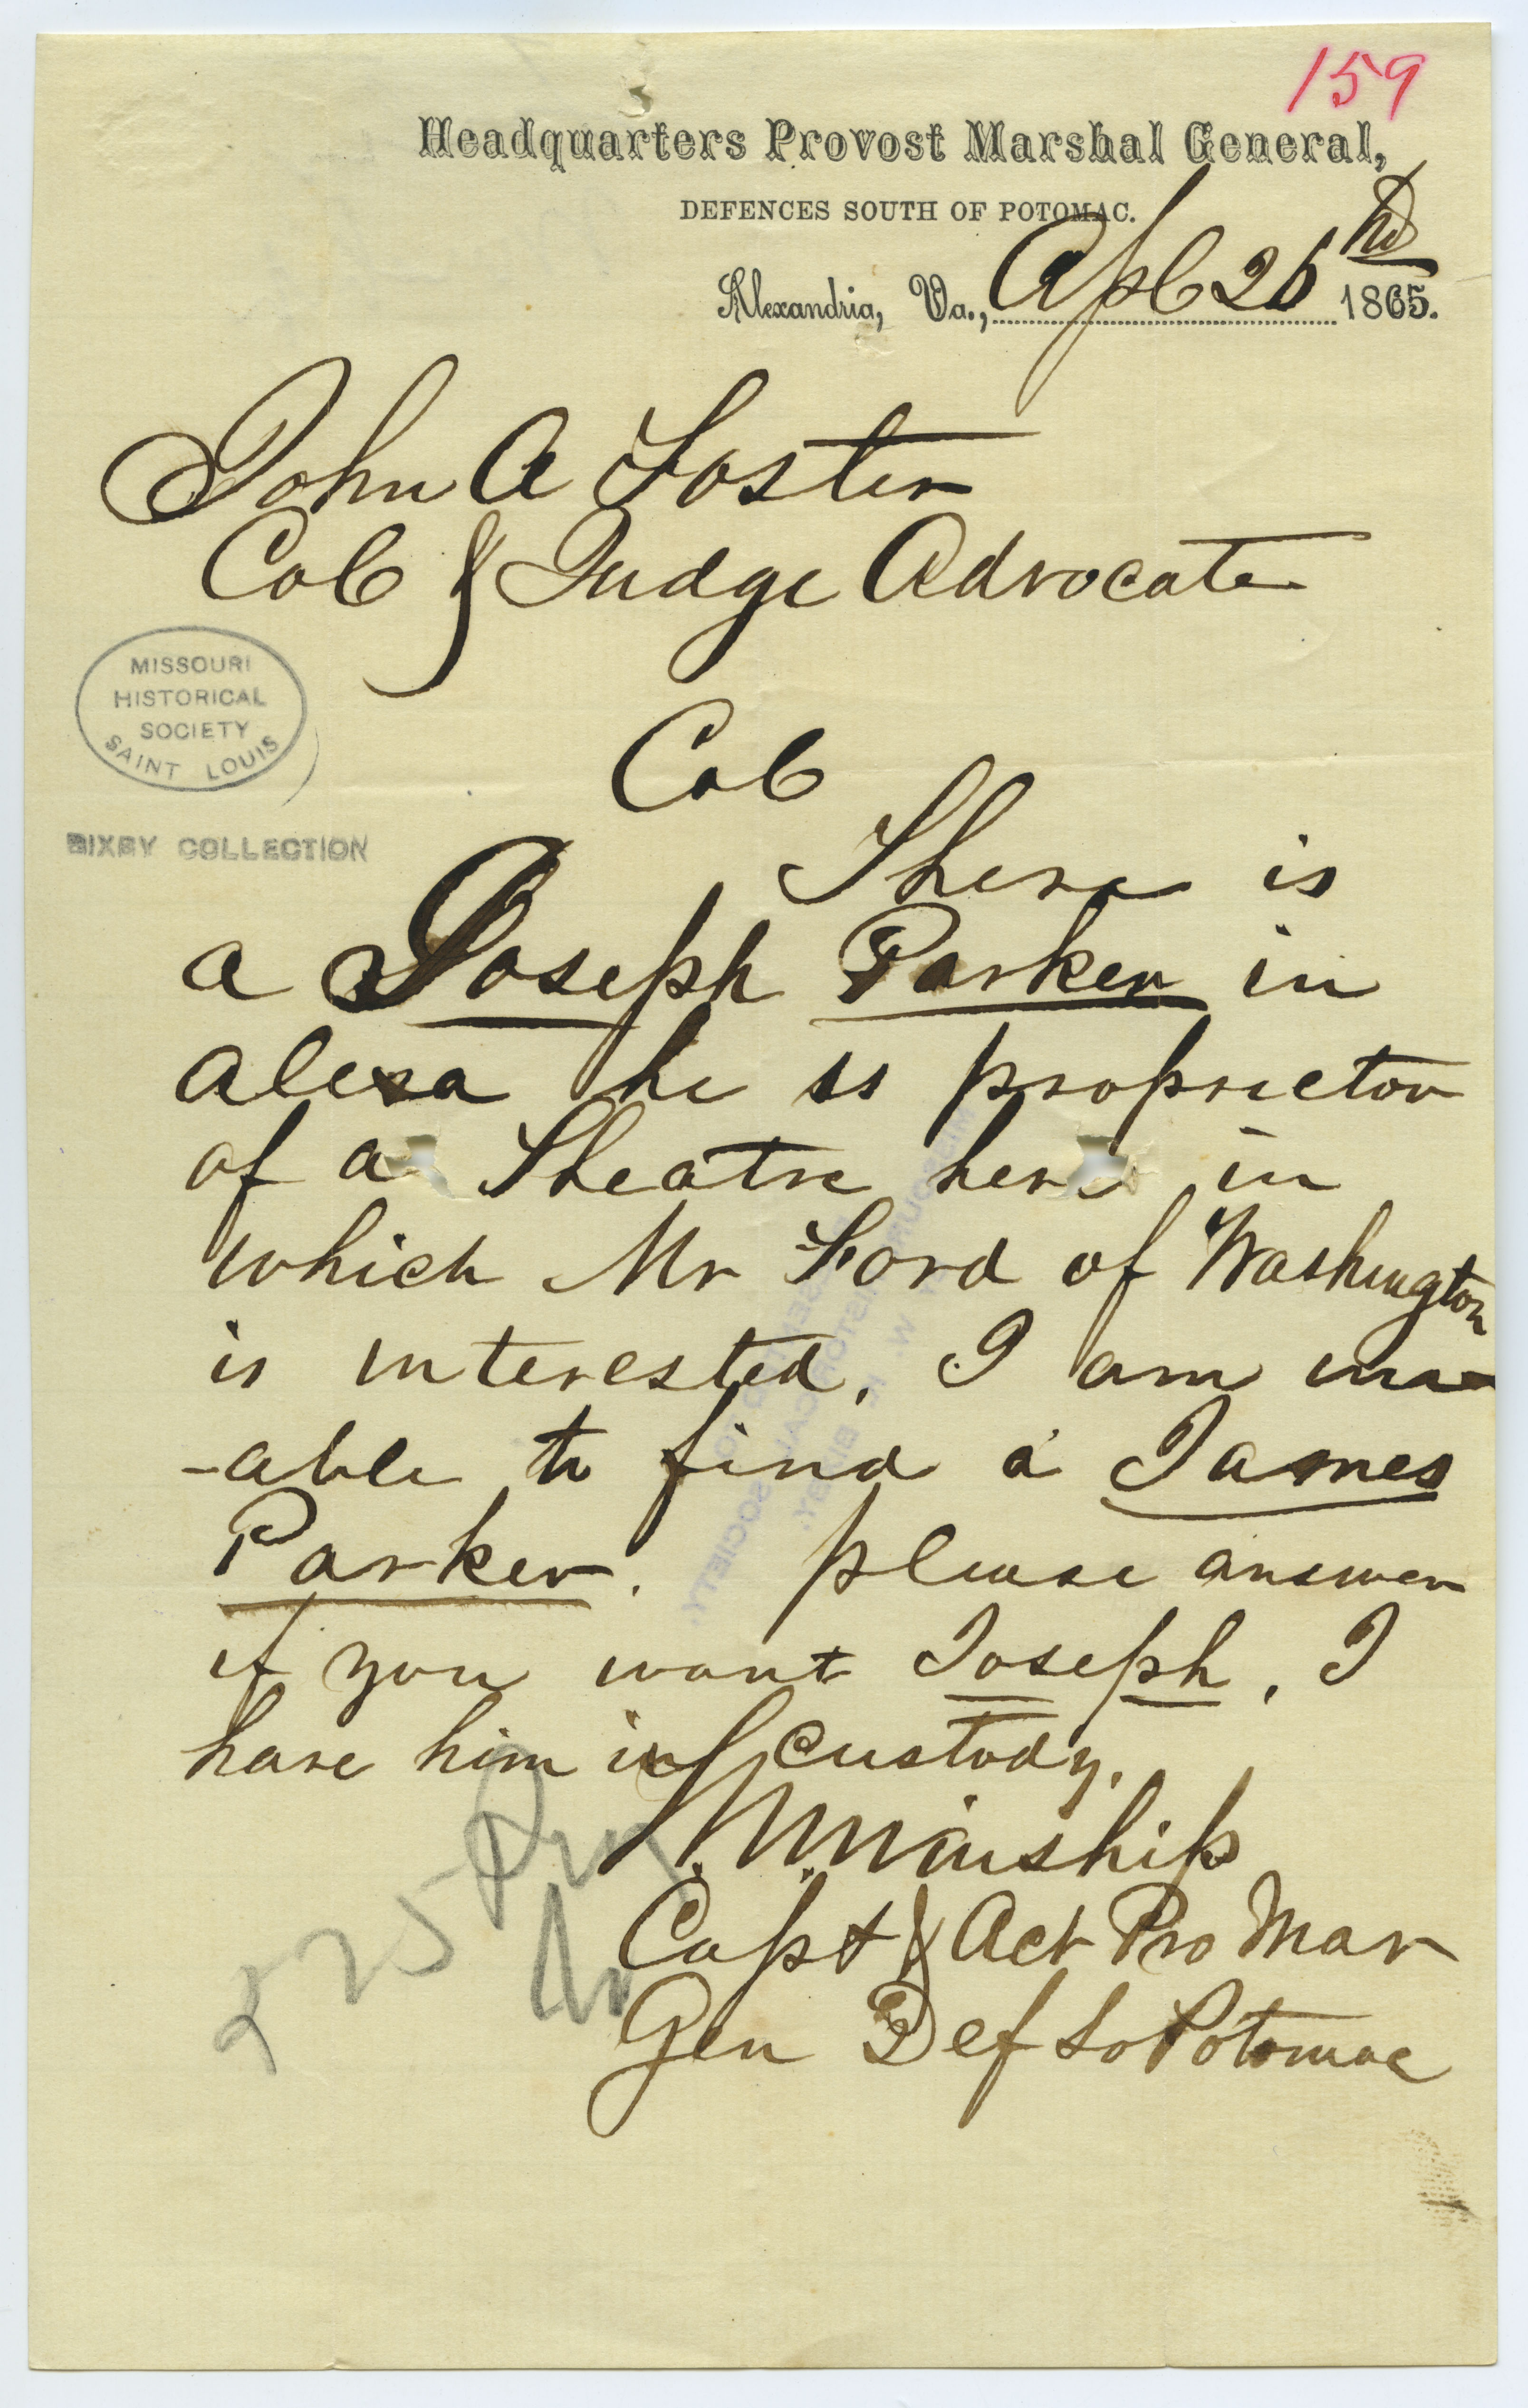 Note signed M. Winship, Headquarters Provost Marshal General, Defences South of Potomac, Alexandria, Va., to John A. Foster, April 26, 1865